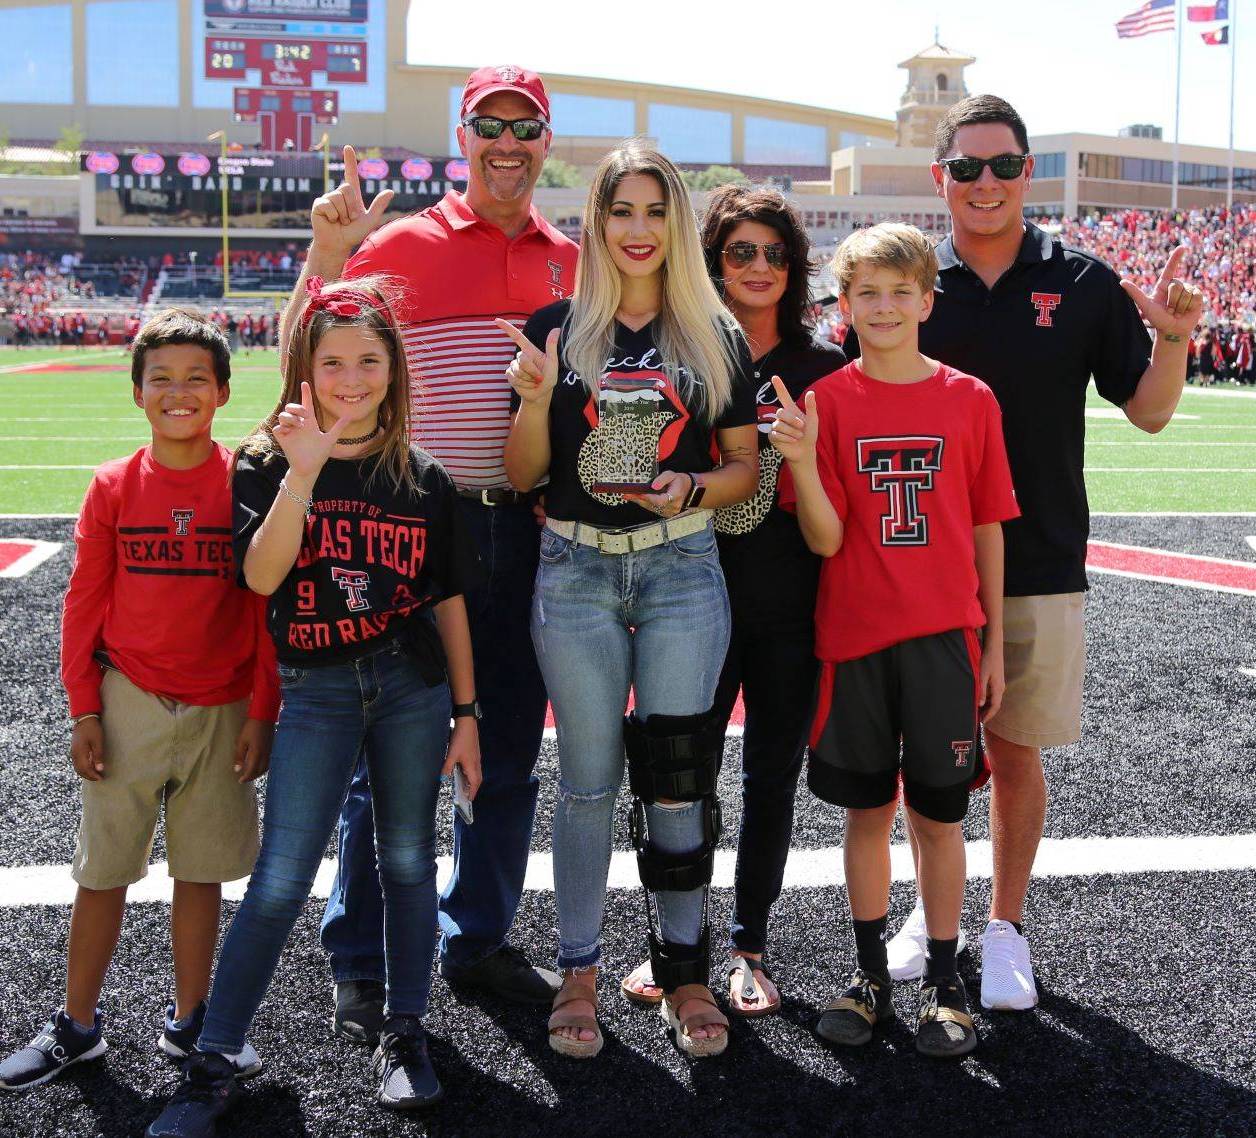 Parents of the Year awarded plaque during the Family Weekend football game